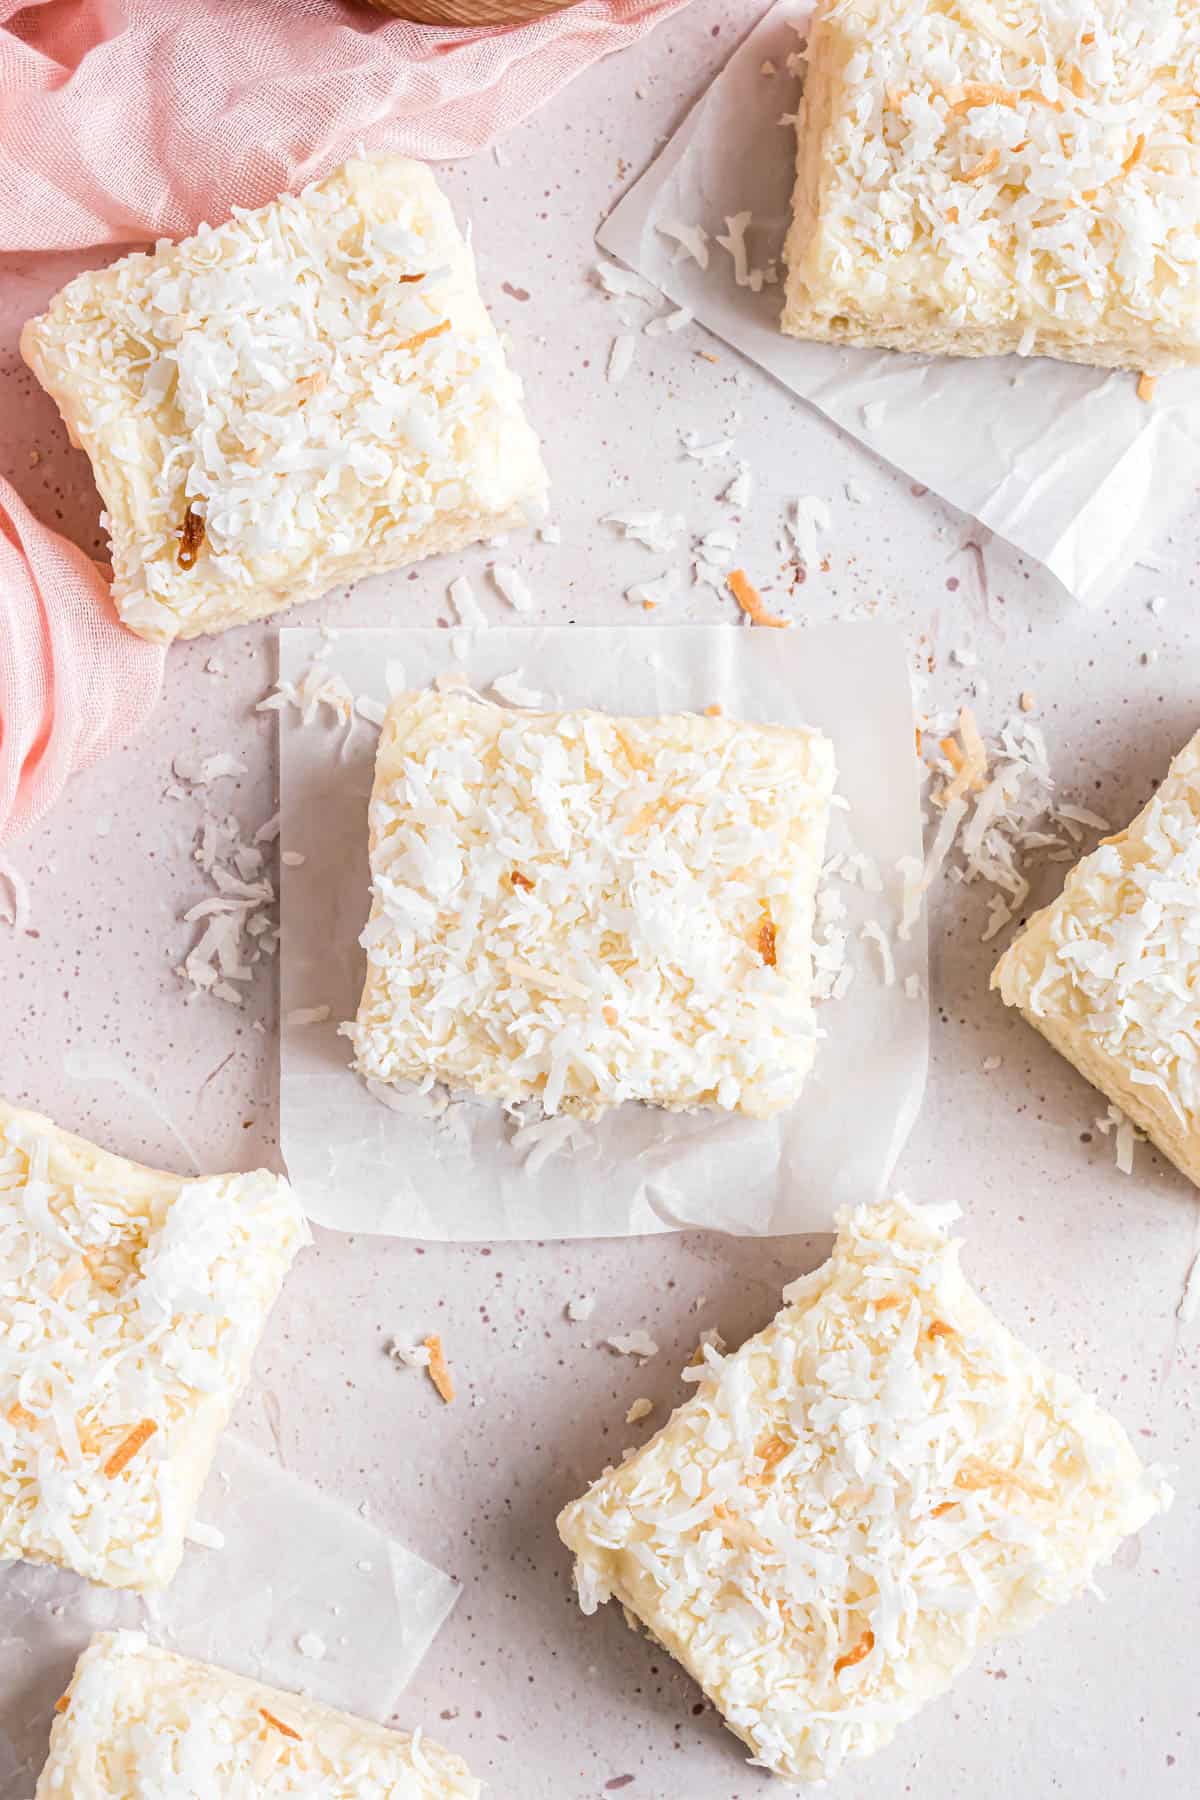 Frosted coconut sugar cookie bars with sweetened shredded coconut sprinkled on top and around them.